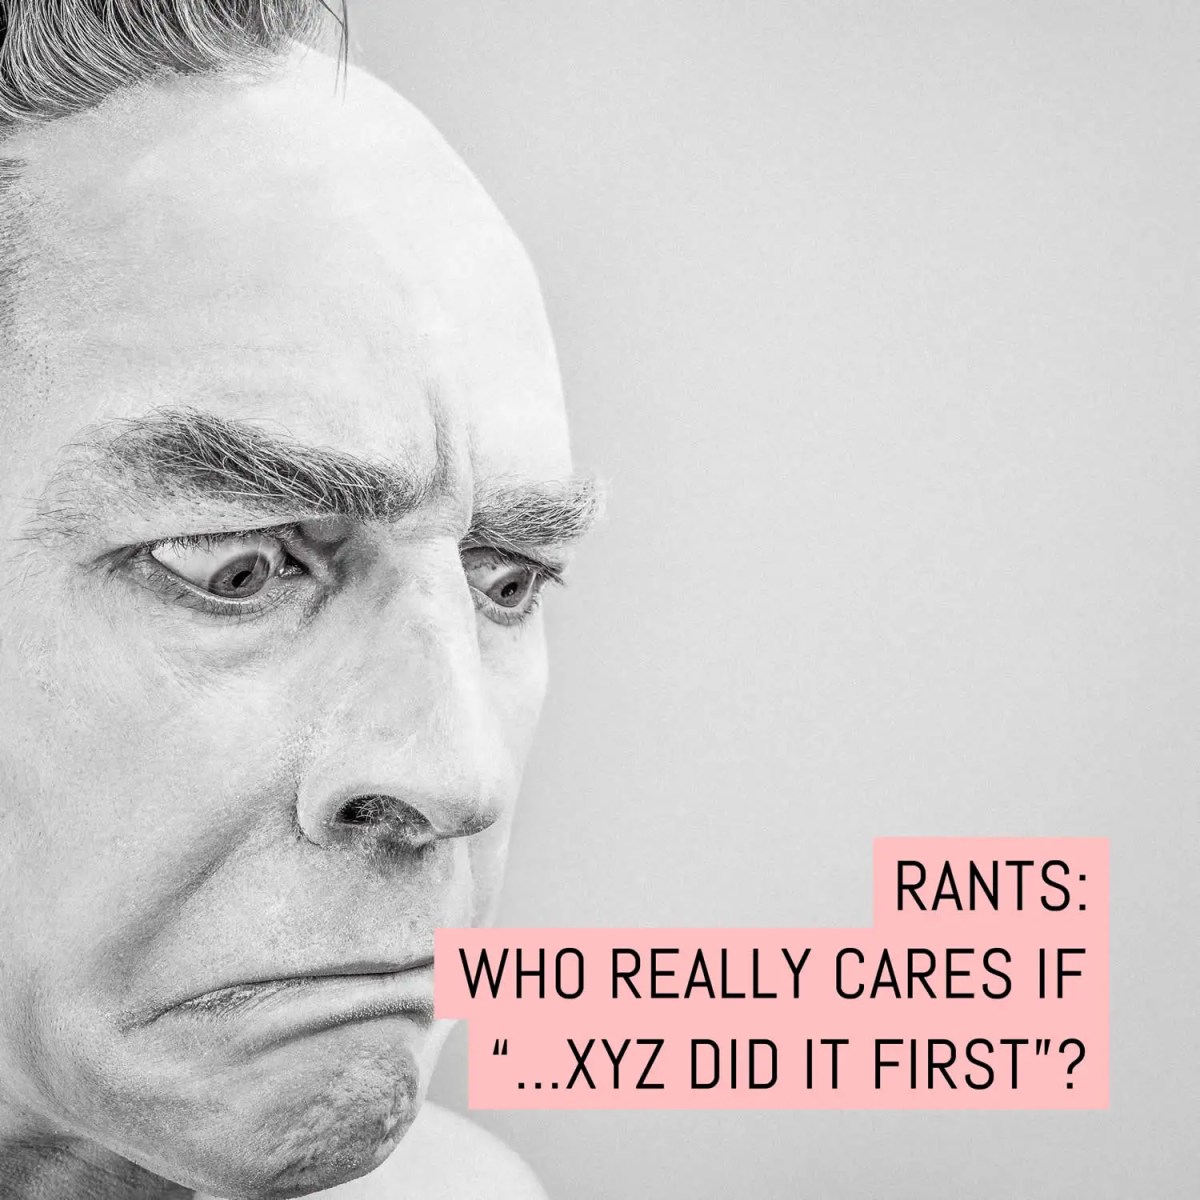 RANTS: Who really cares if ...XYZ did it first"?